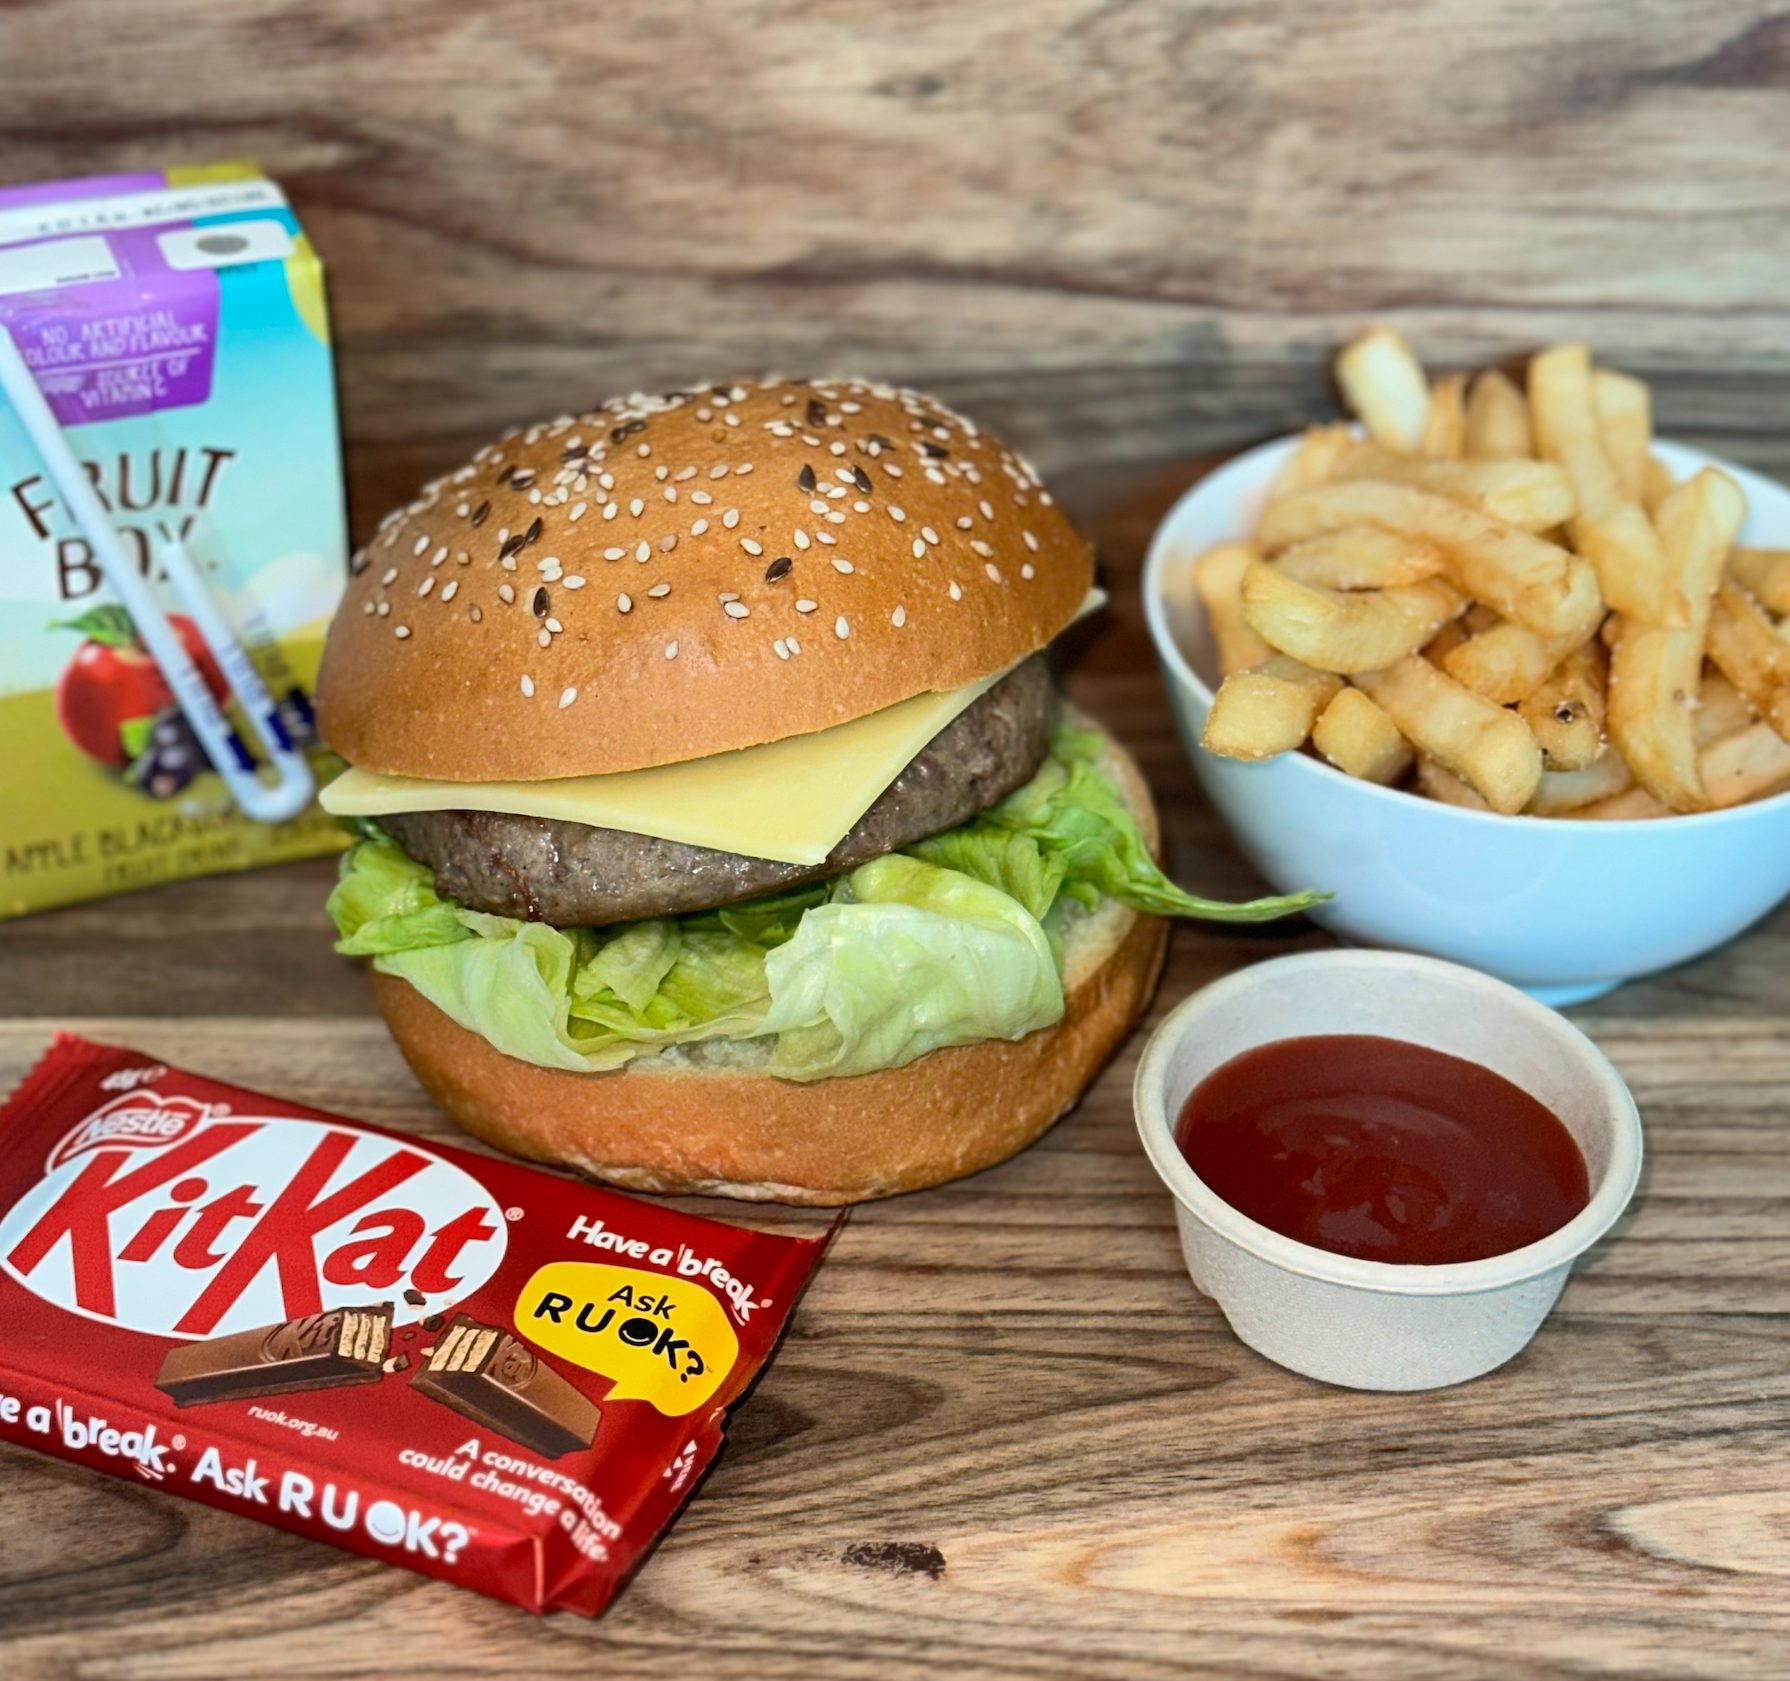 Cheese Burger, Large Fries, Sauce, Chocolate Bar and Juice Box/Soft Drink ($50.00)